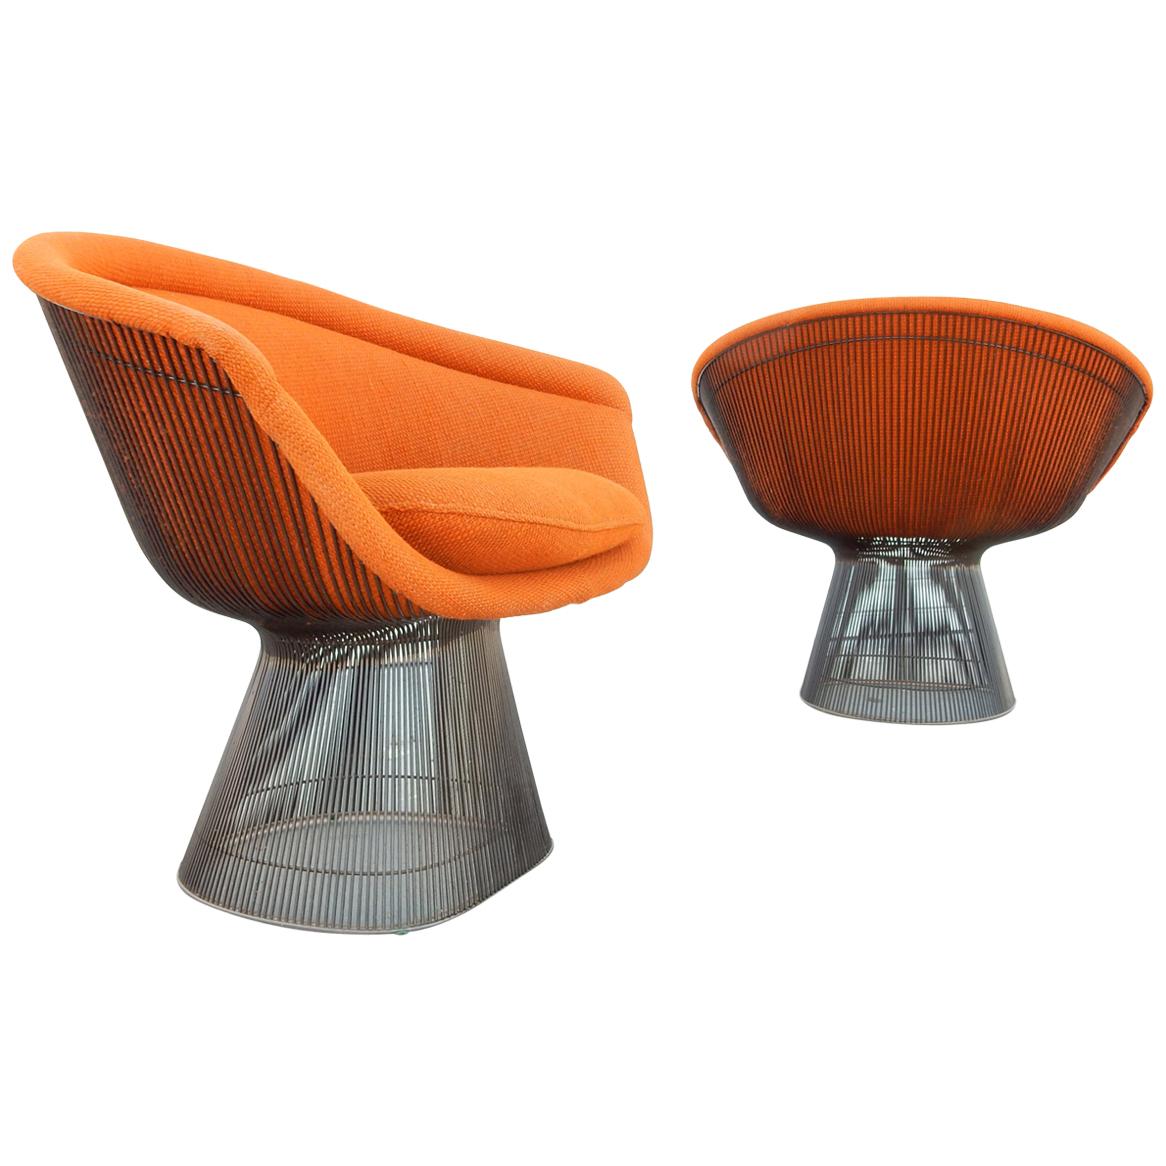 Pair of Warren Platner for Knoll Lounge Chairs Mid-Century Modern, 1978